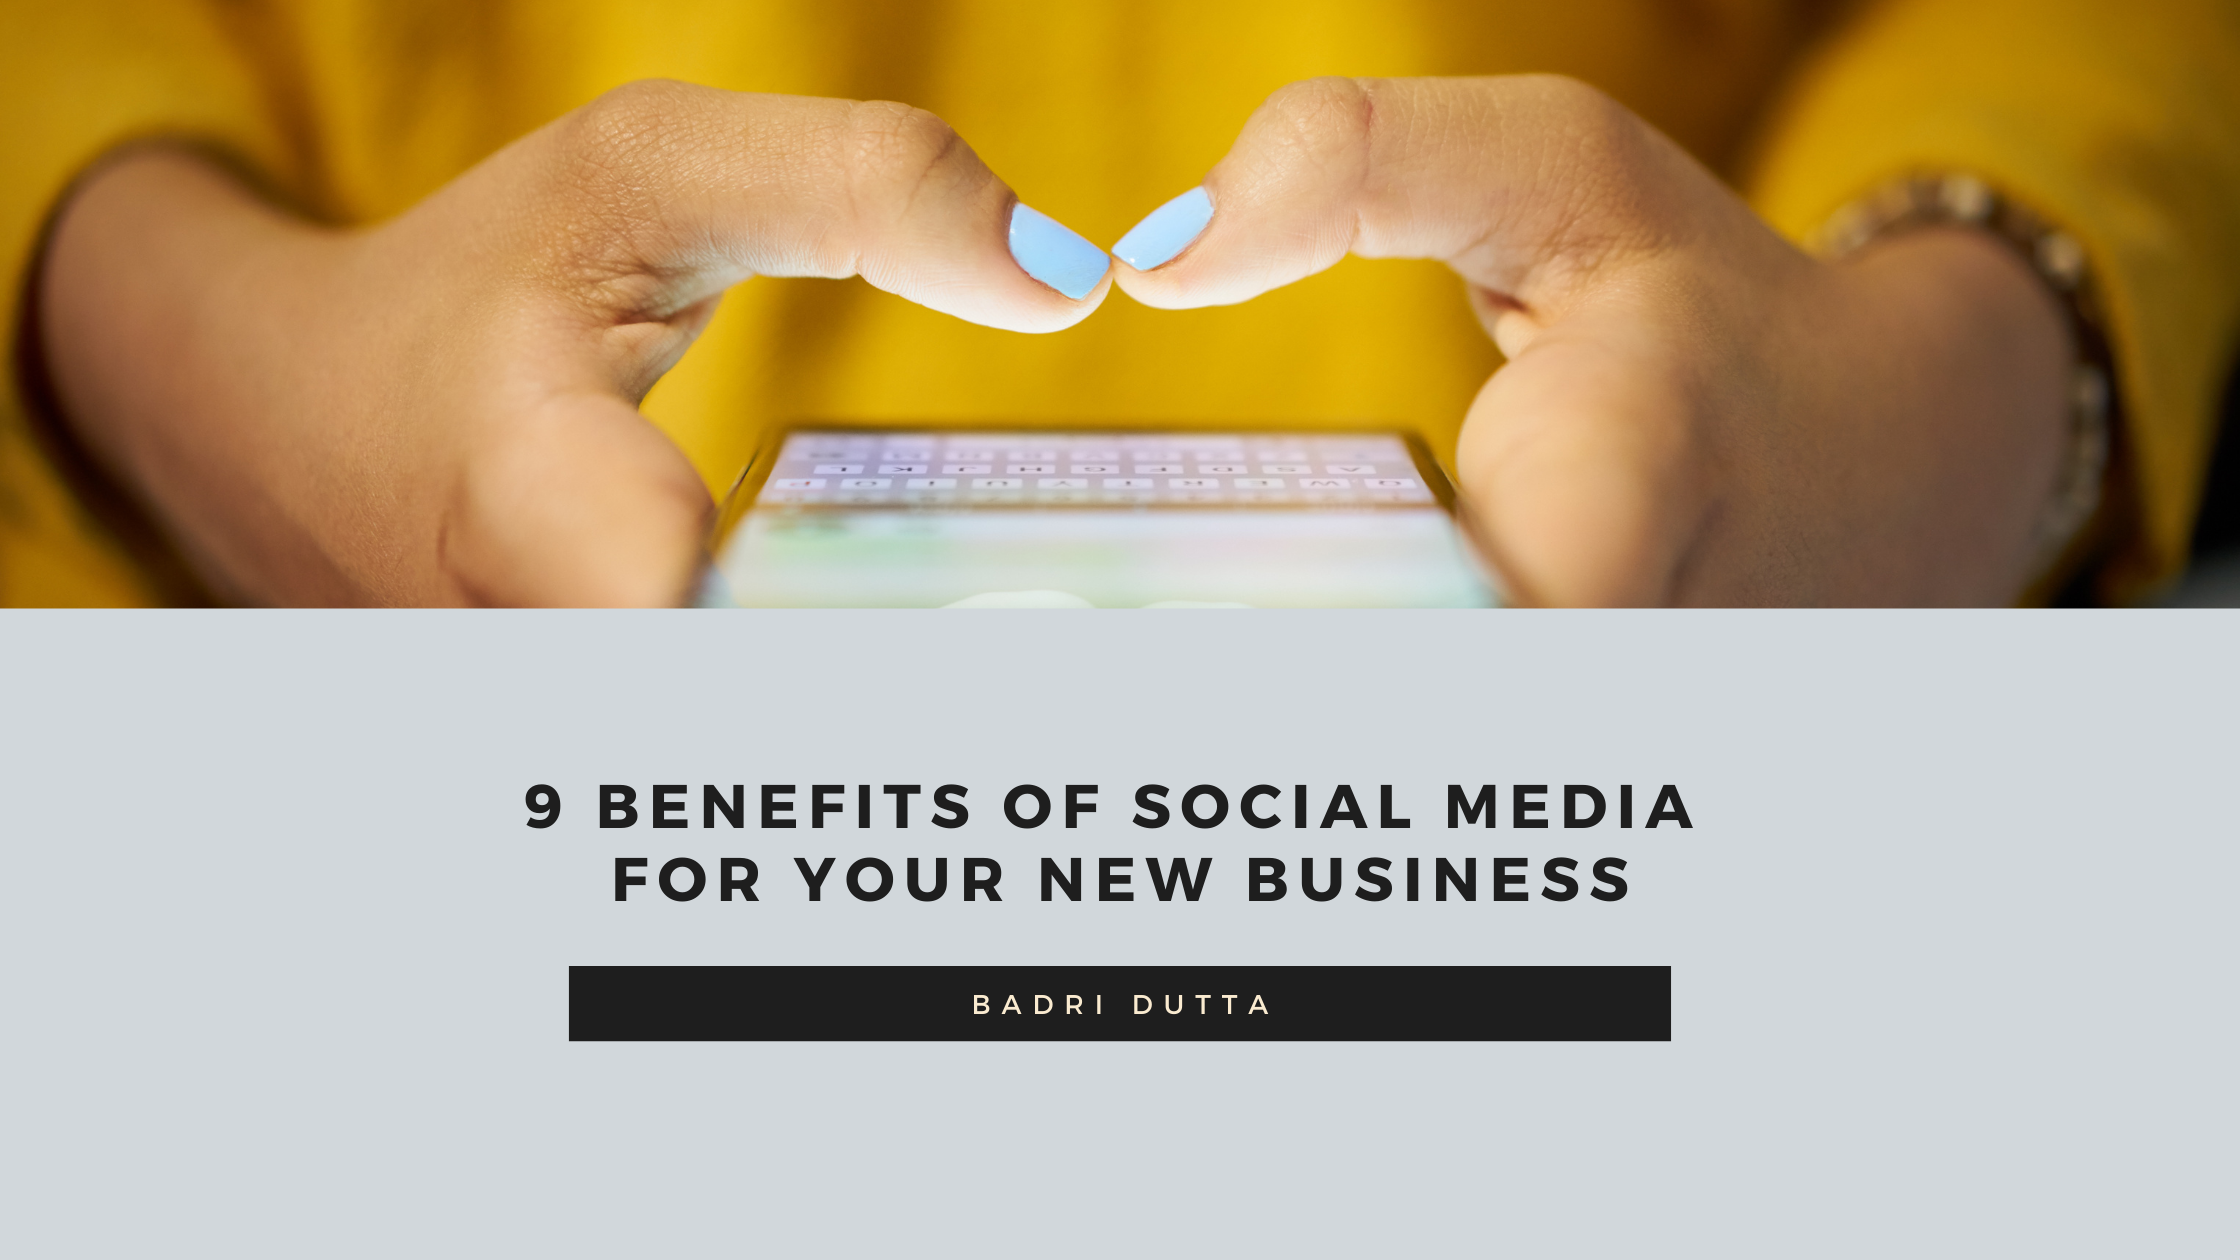 Social media is a cost-effective marketing opportunity. It helps your new business build trust, raise awareness, and generate connections.